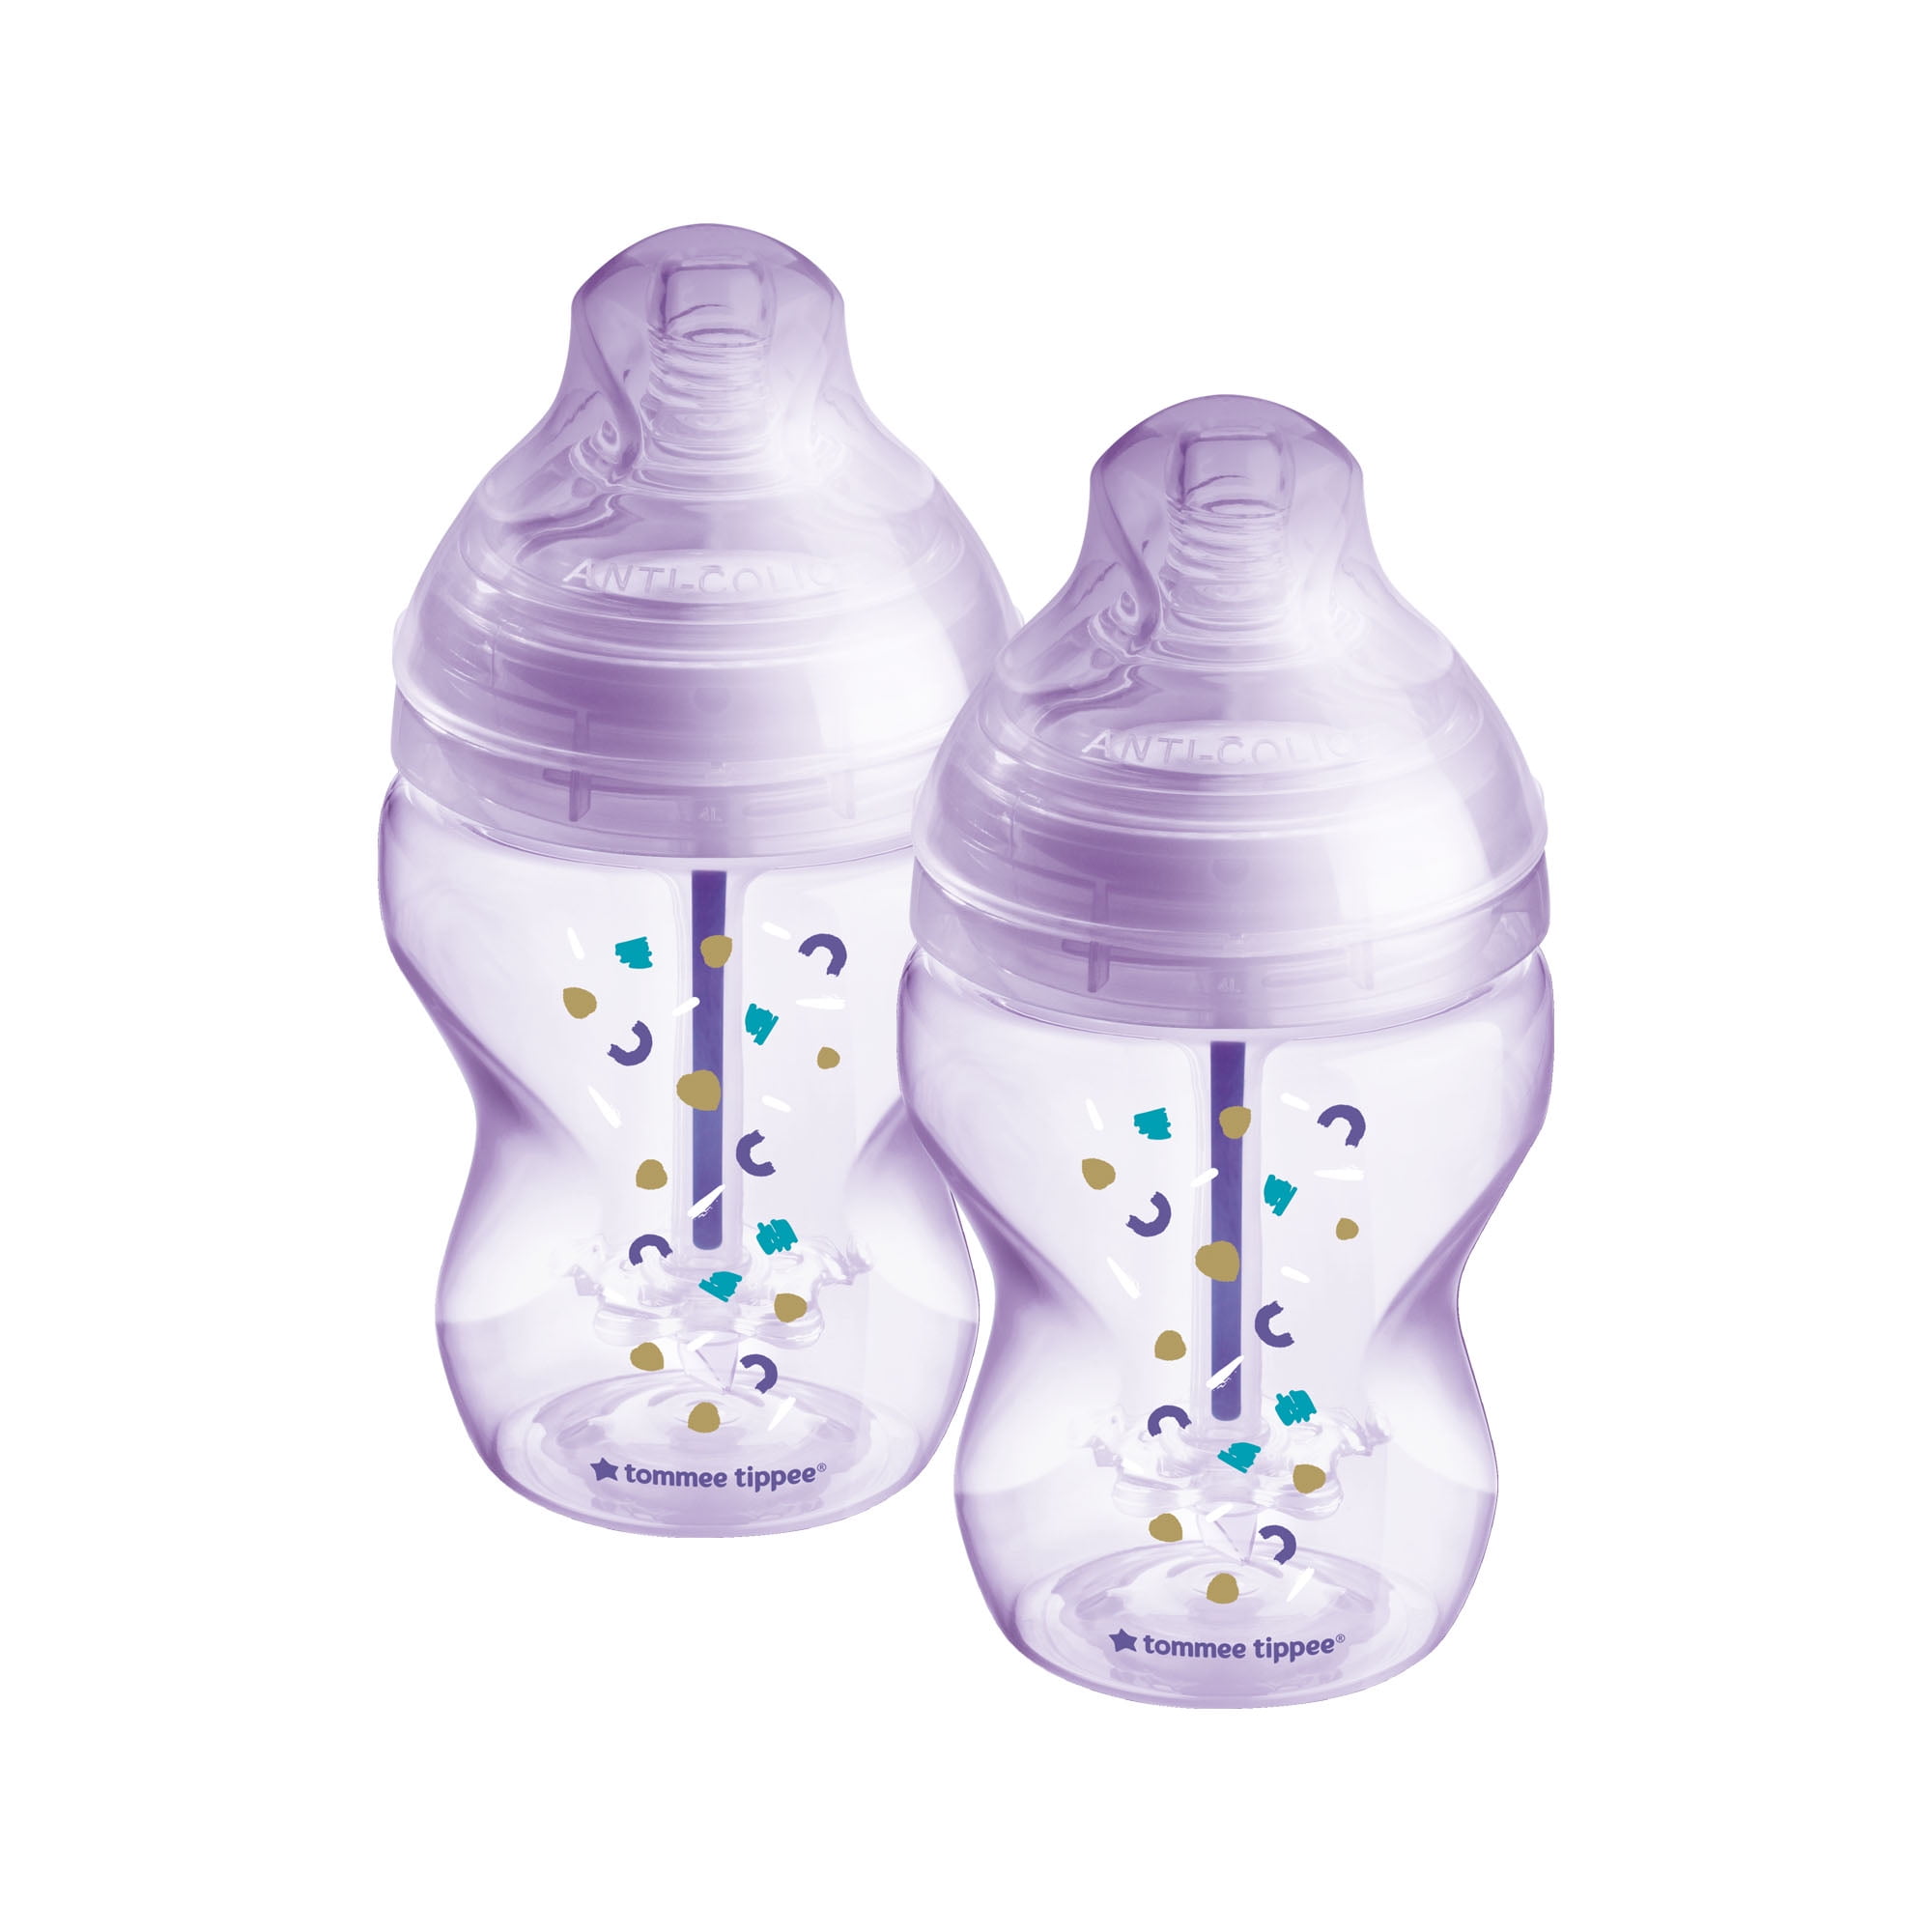 Tommee Tippee Anti-Colic Baby Bottles - 9 fl oz, Newborn (2 Count)